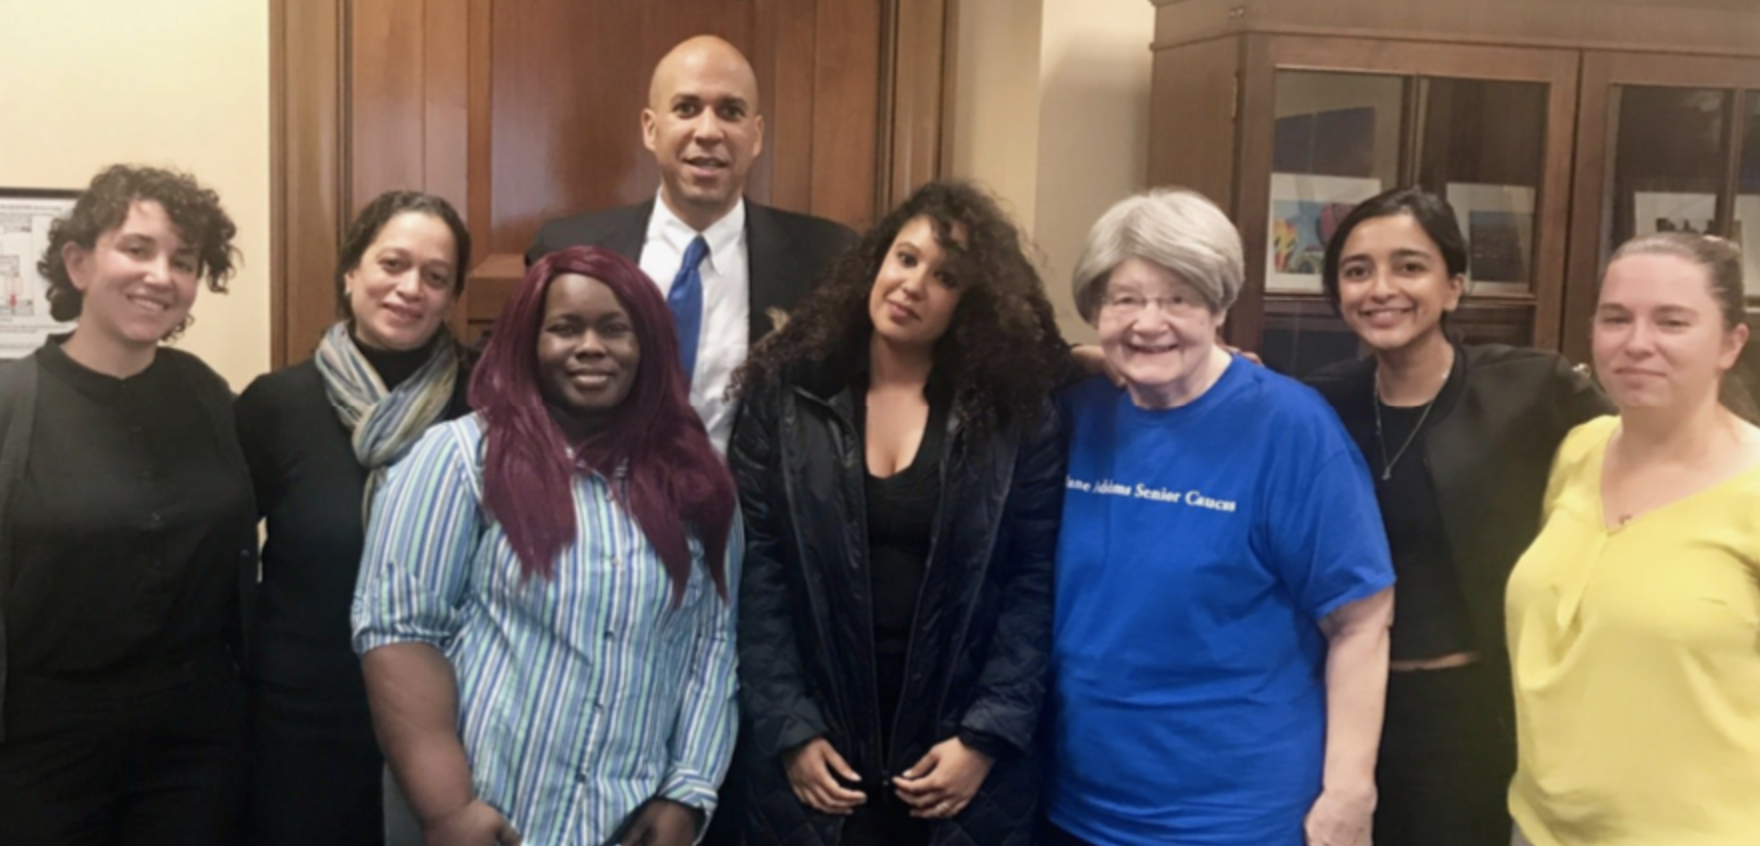 People's Action members meet with Sen. Corey Booker on Capitol Hill in Washington, DC.